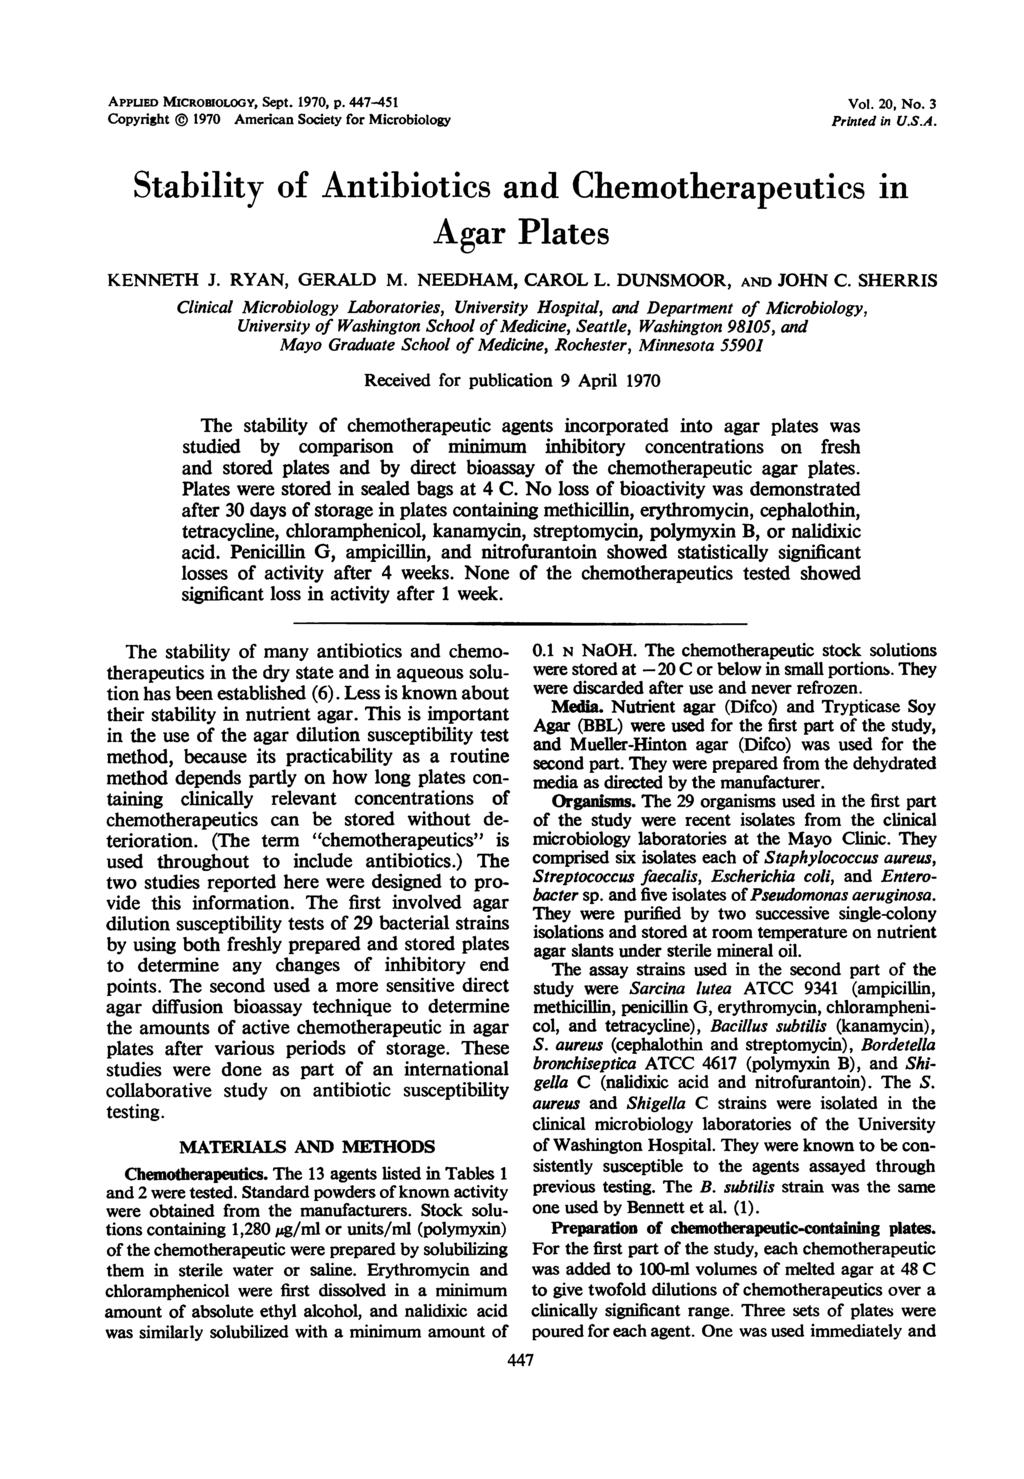 APPUED MICROBIOLOGY, Sept. 1970, p. 447-451 Copyright 1970 American Society for Microbiology Vol. 20, No. 3 Printed in U.S.A. Stability of Antibiotics and Chemotherapeutics in Agar Plates KENNETH J.